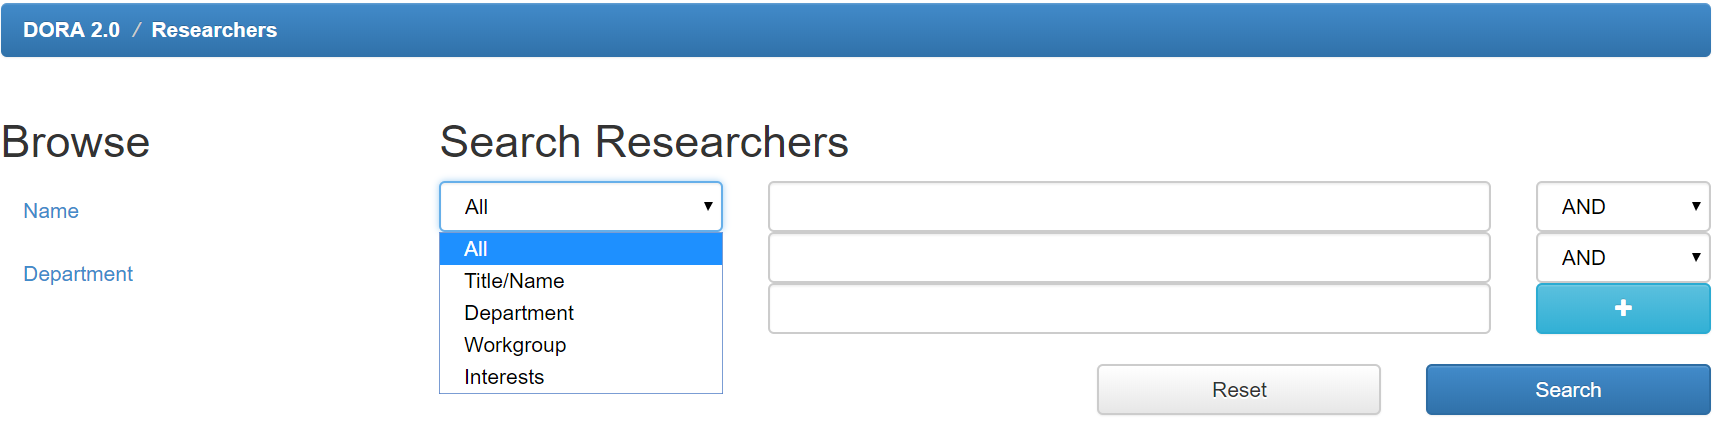 A screen for browsing researchers, looking at filtering options. 